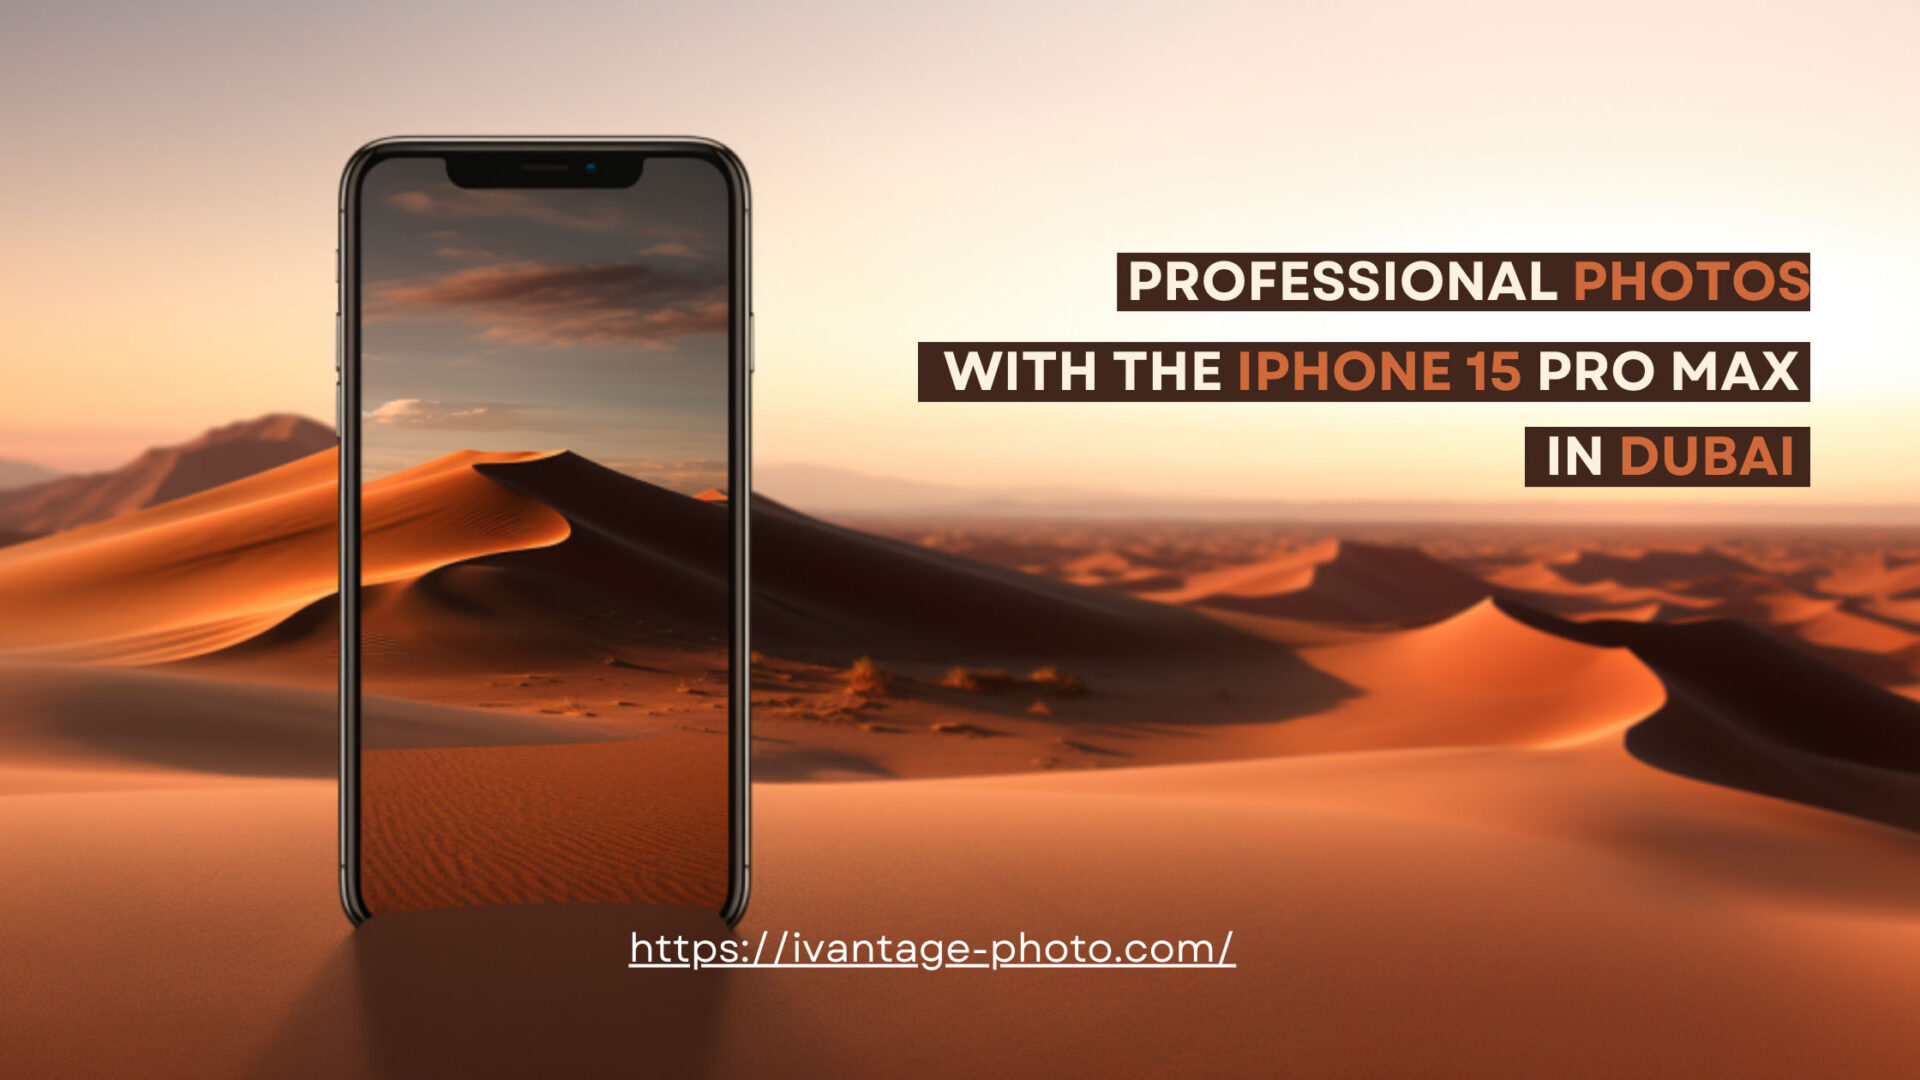 An iPhone 15 Pro Max set against the vast expanse of Dubai's desert landscape, showcasing its potential for professional photography.